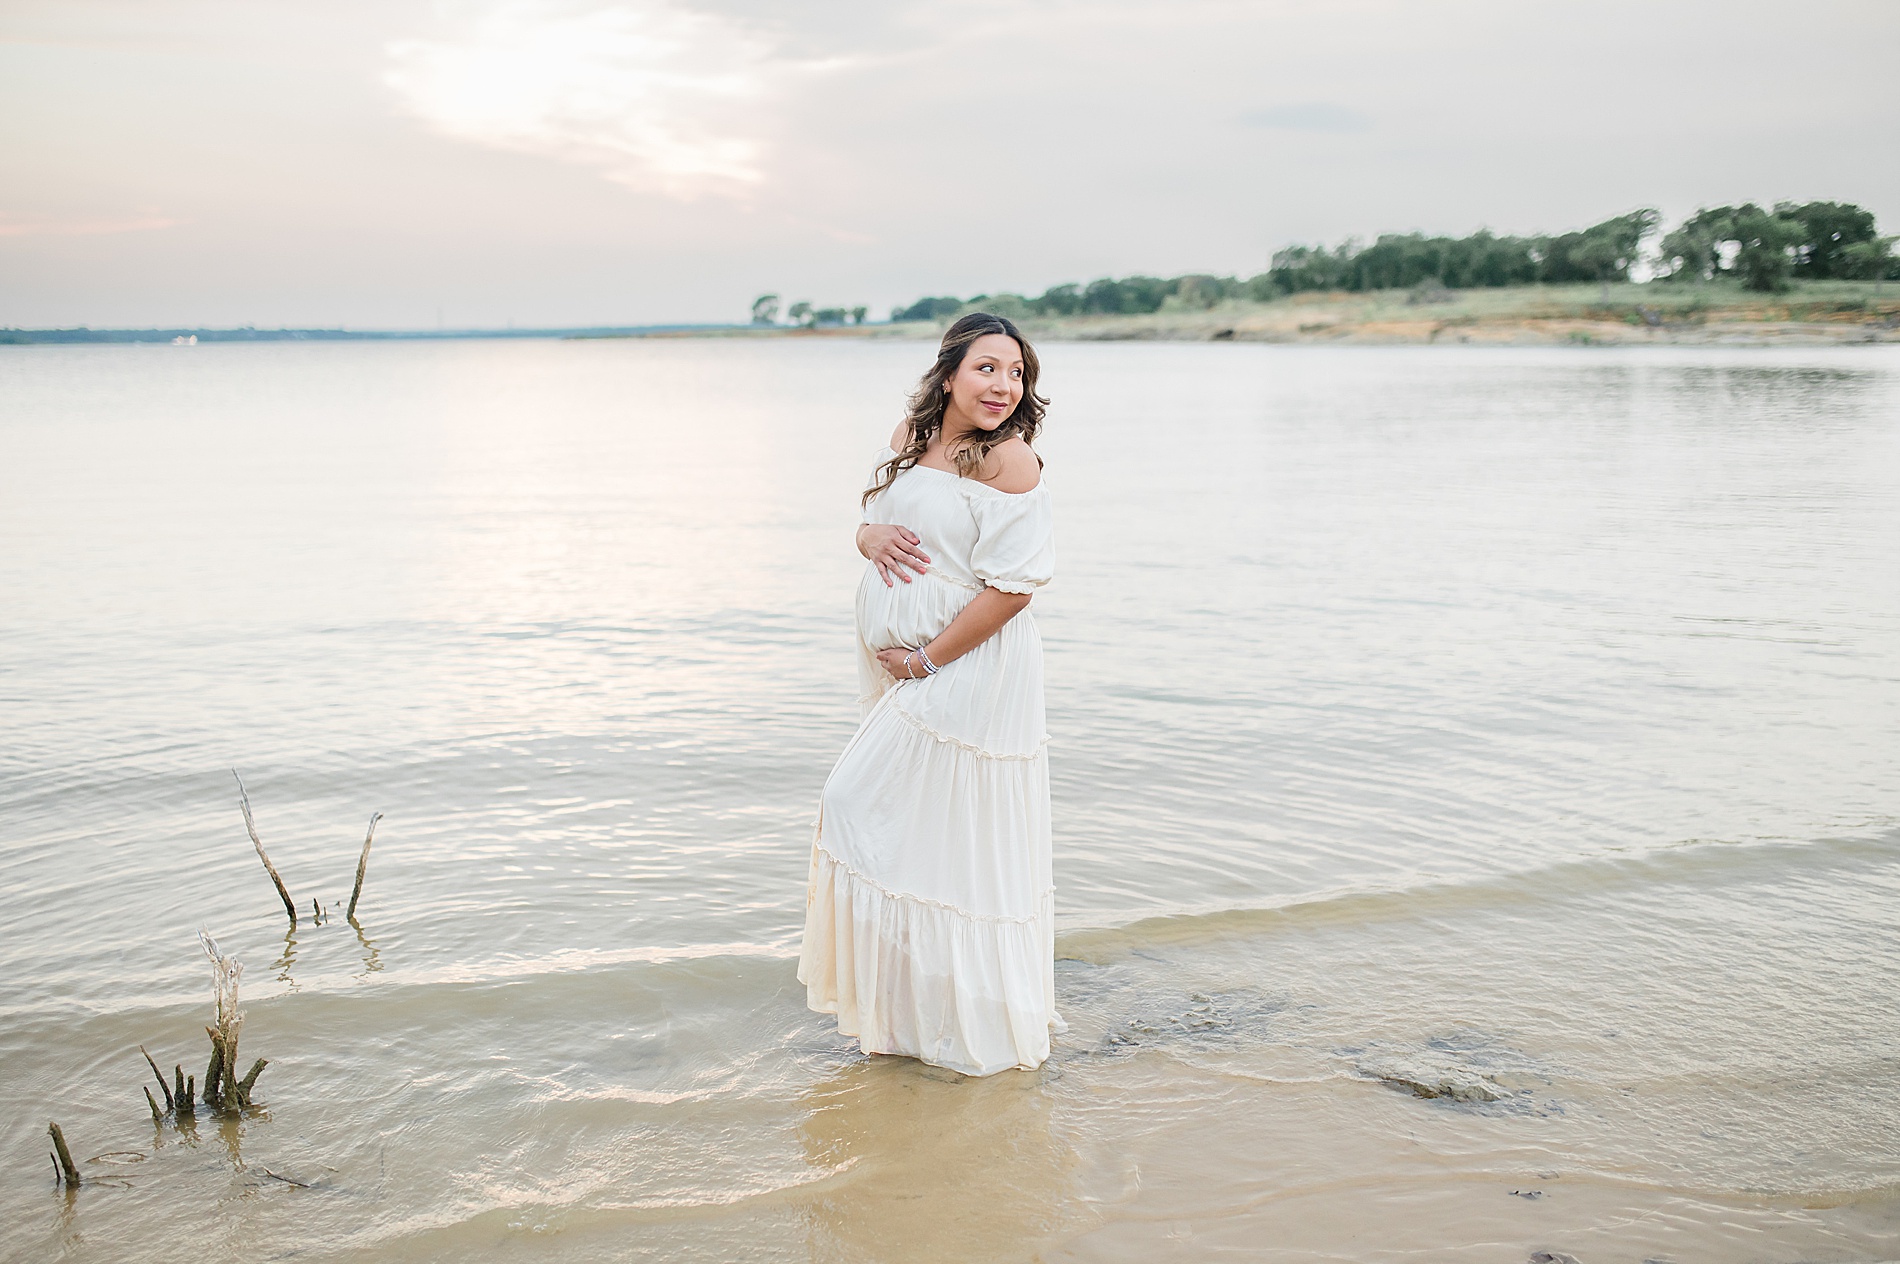 maternity portraits at lake in Texas, Top 11 Dallas-Fort Worth Picture Locations photographed by Lindsey Dutton Photography, a Dallas Family photographer
